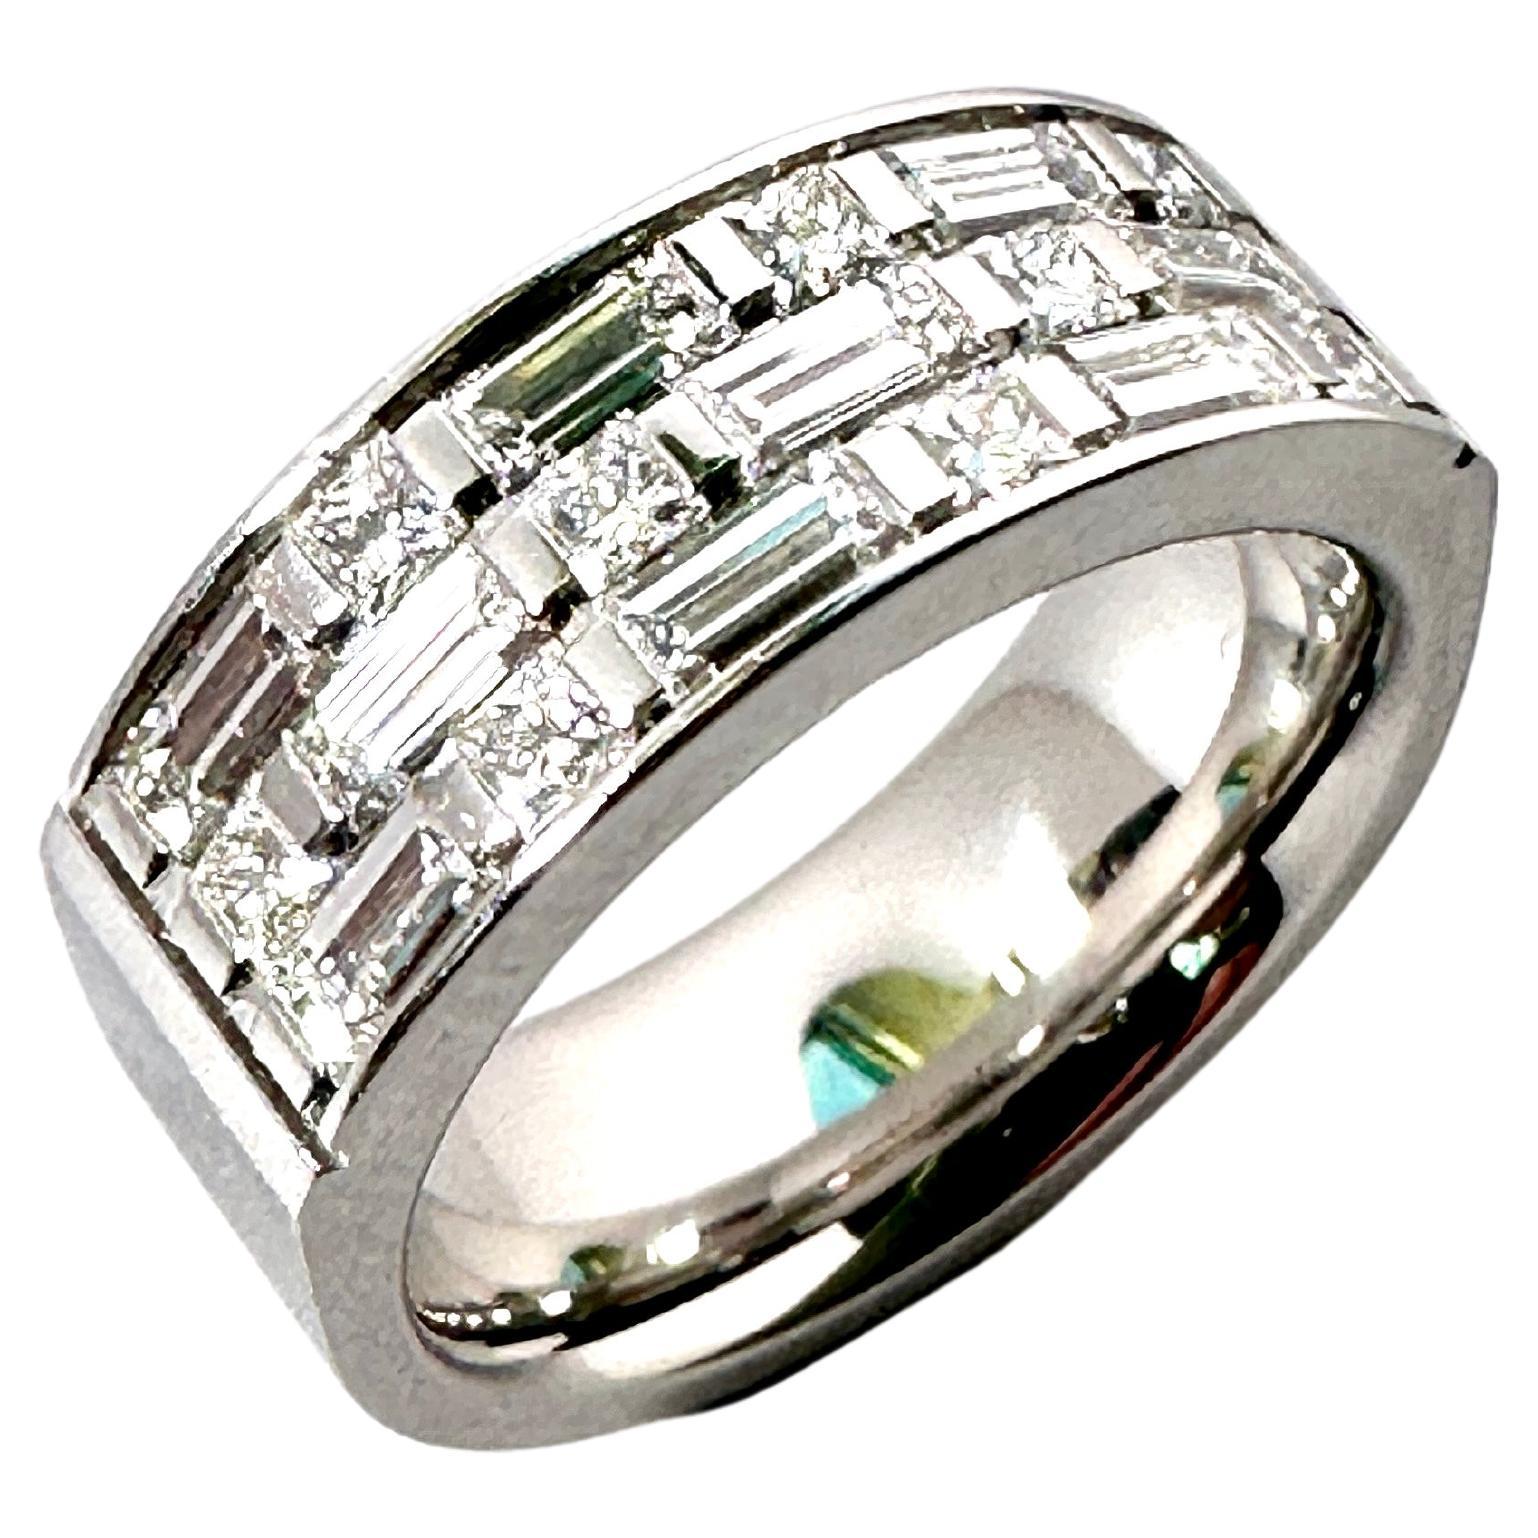 Platinum Ring with 9 Princess and 9 Baguette cut diamonds F-vvs 1.450 ct total For Sale